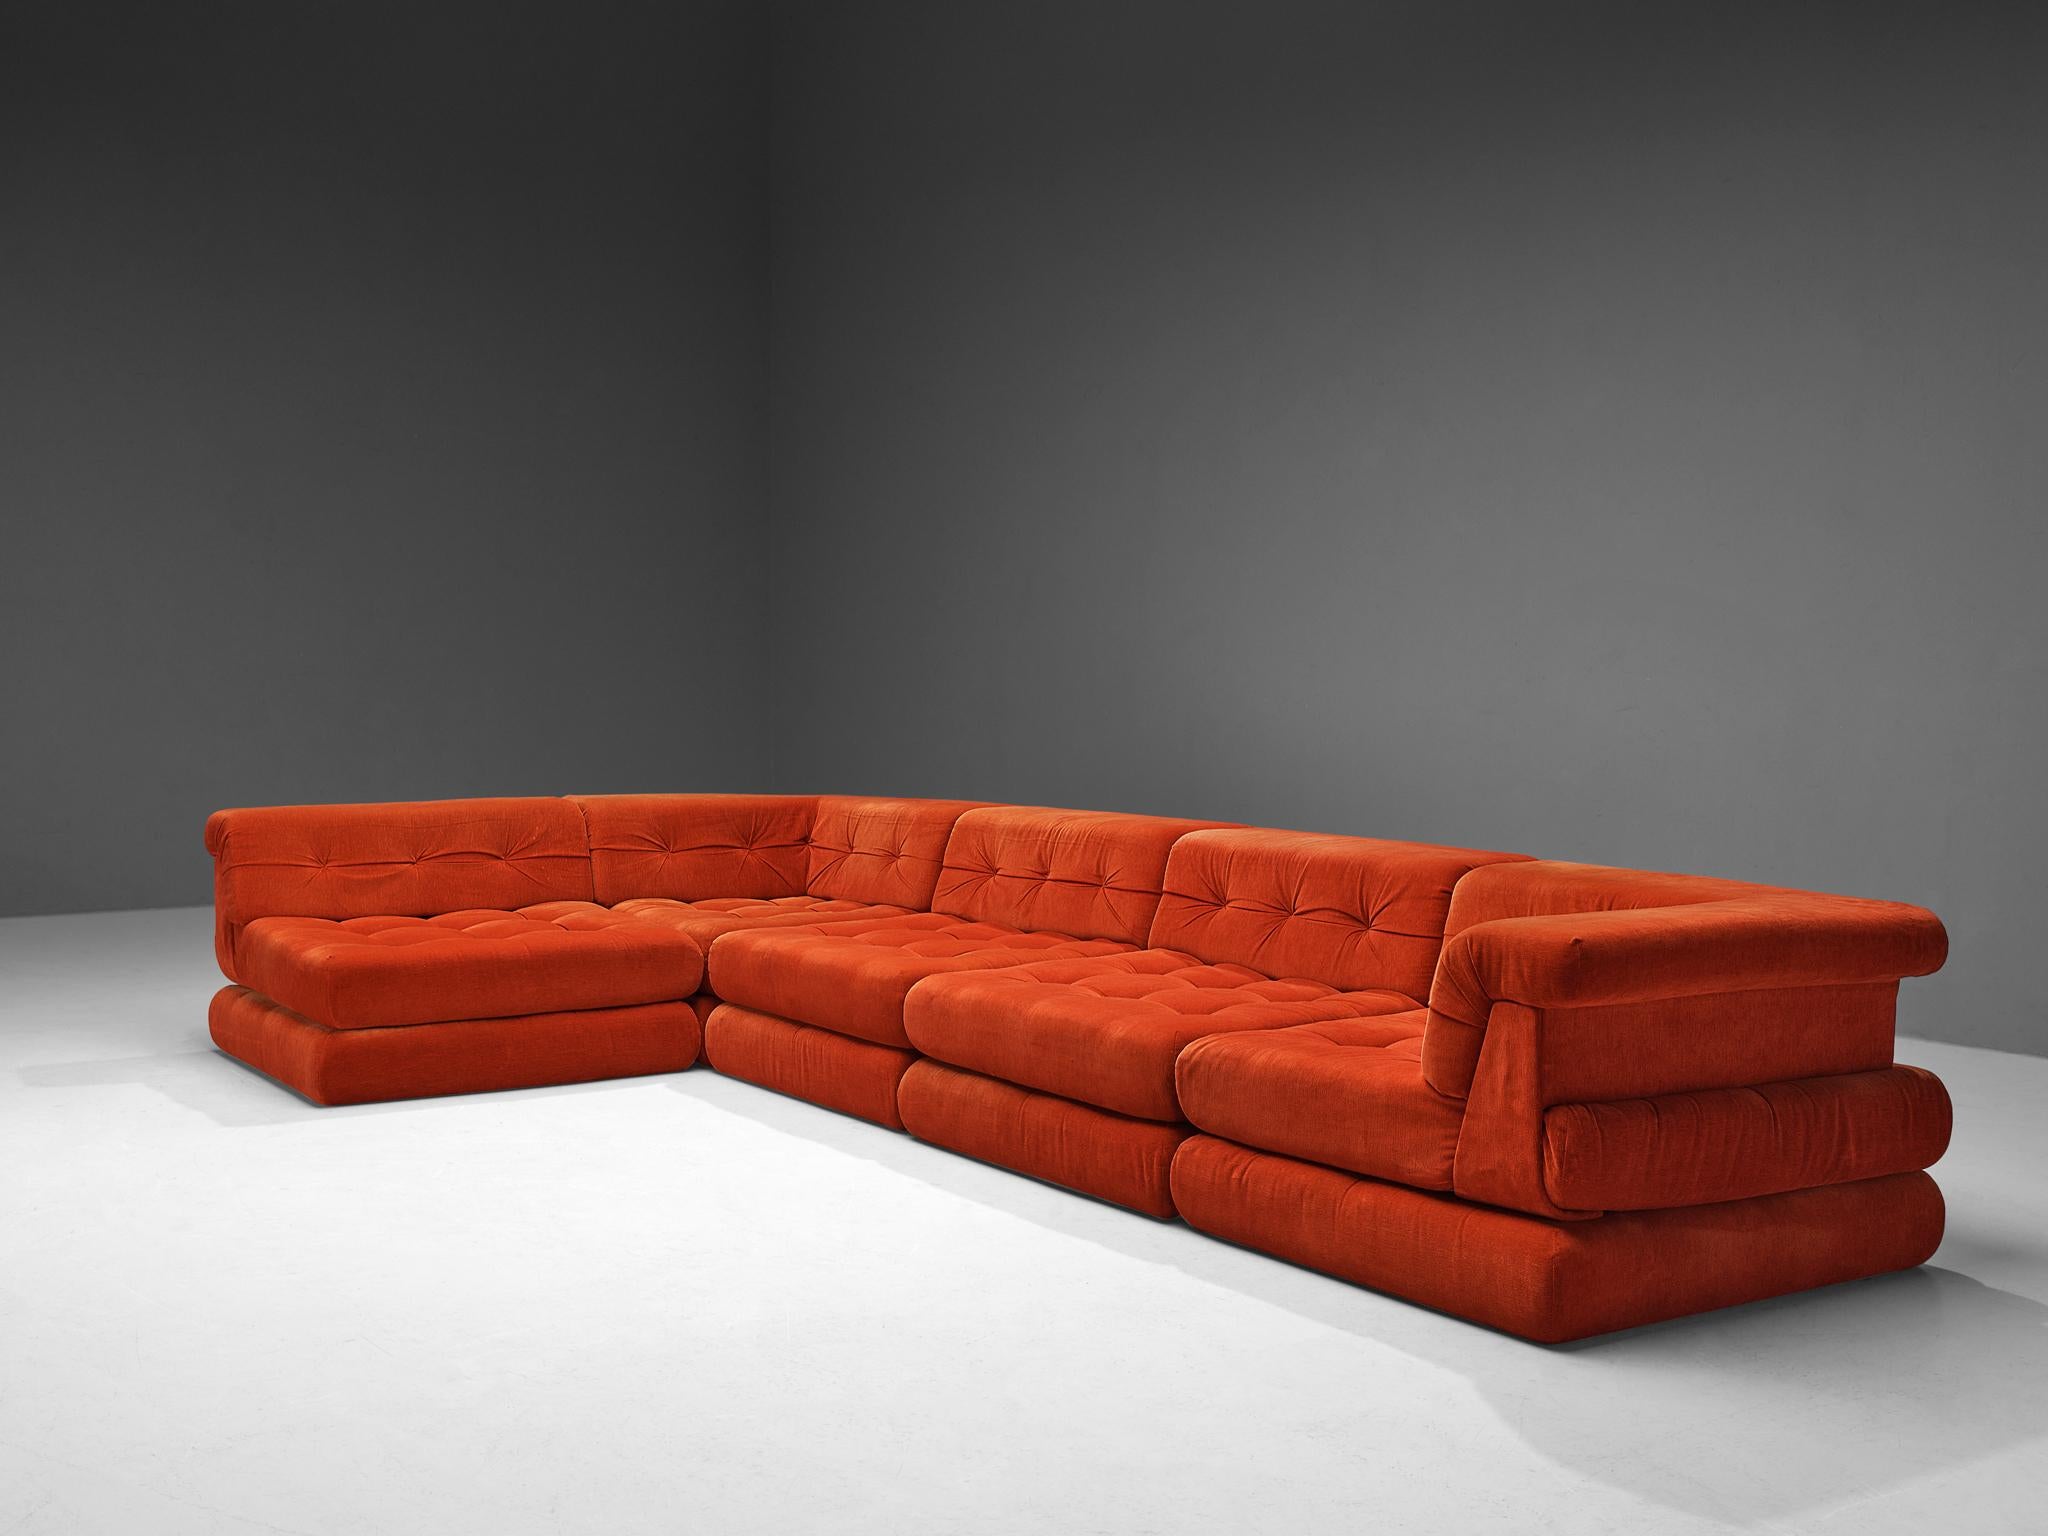 Hans Hopfer for Roche Bobois, 'Mah Jong' modular sofa, velvet fabric, France, designed in 1971

'Mah Jong' modular sofa by Hans Hopfer for Roche Bobois France. This design truly resembles the ethos of the seventies – a bright and bold era. The piece